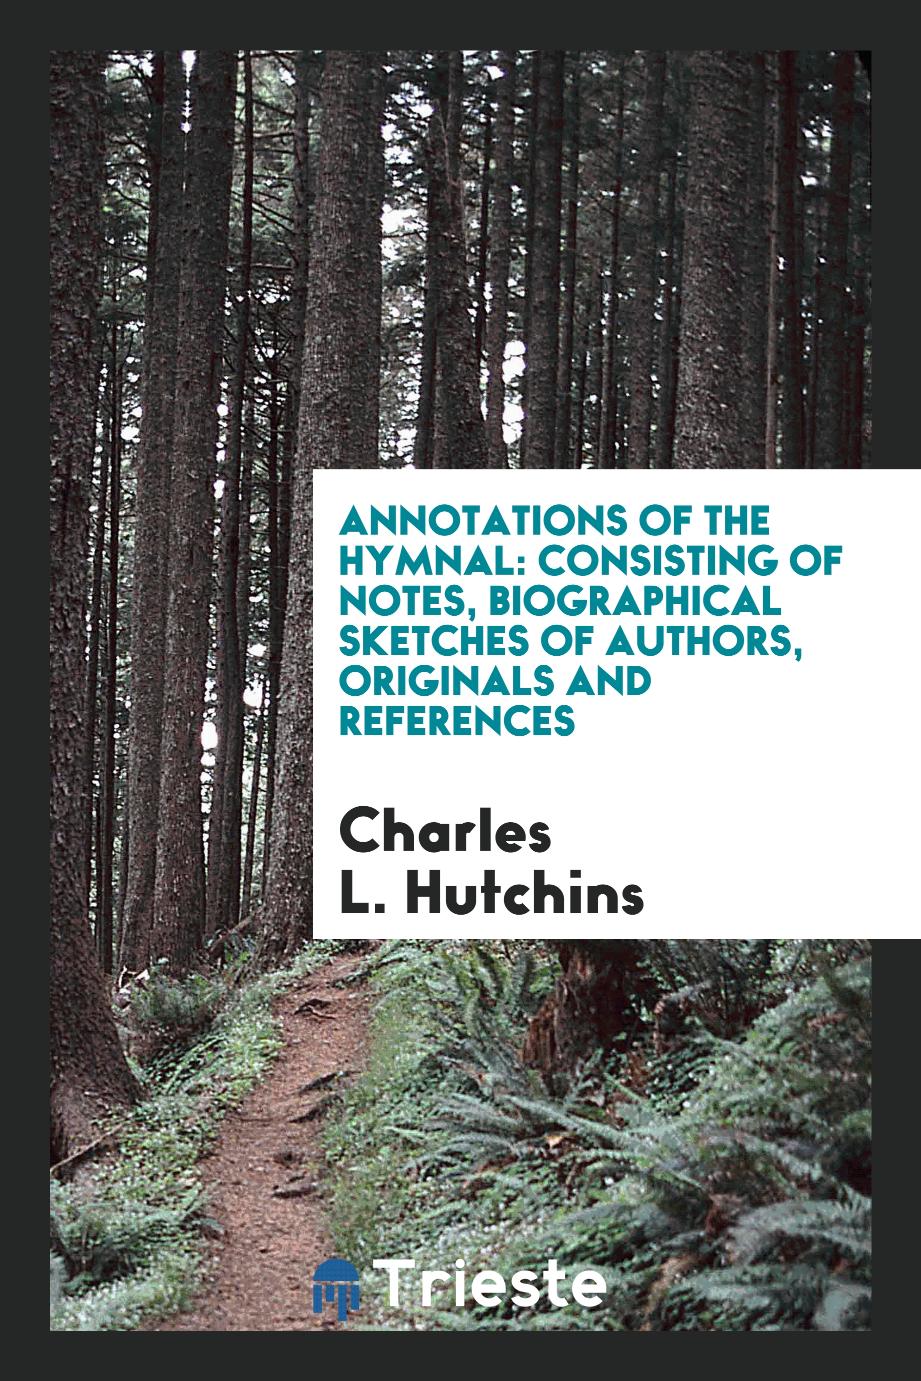 Annotations of the hymnal: consisting of notes, biographical sketches of authors, originals and references